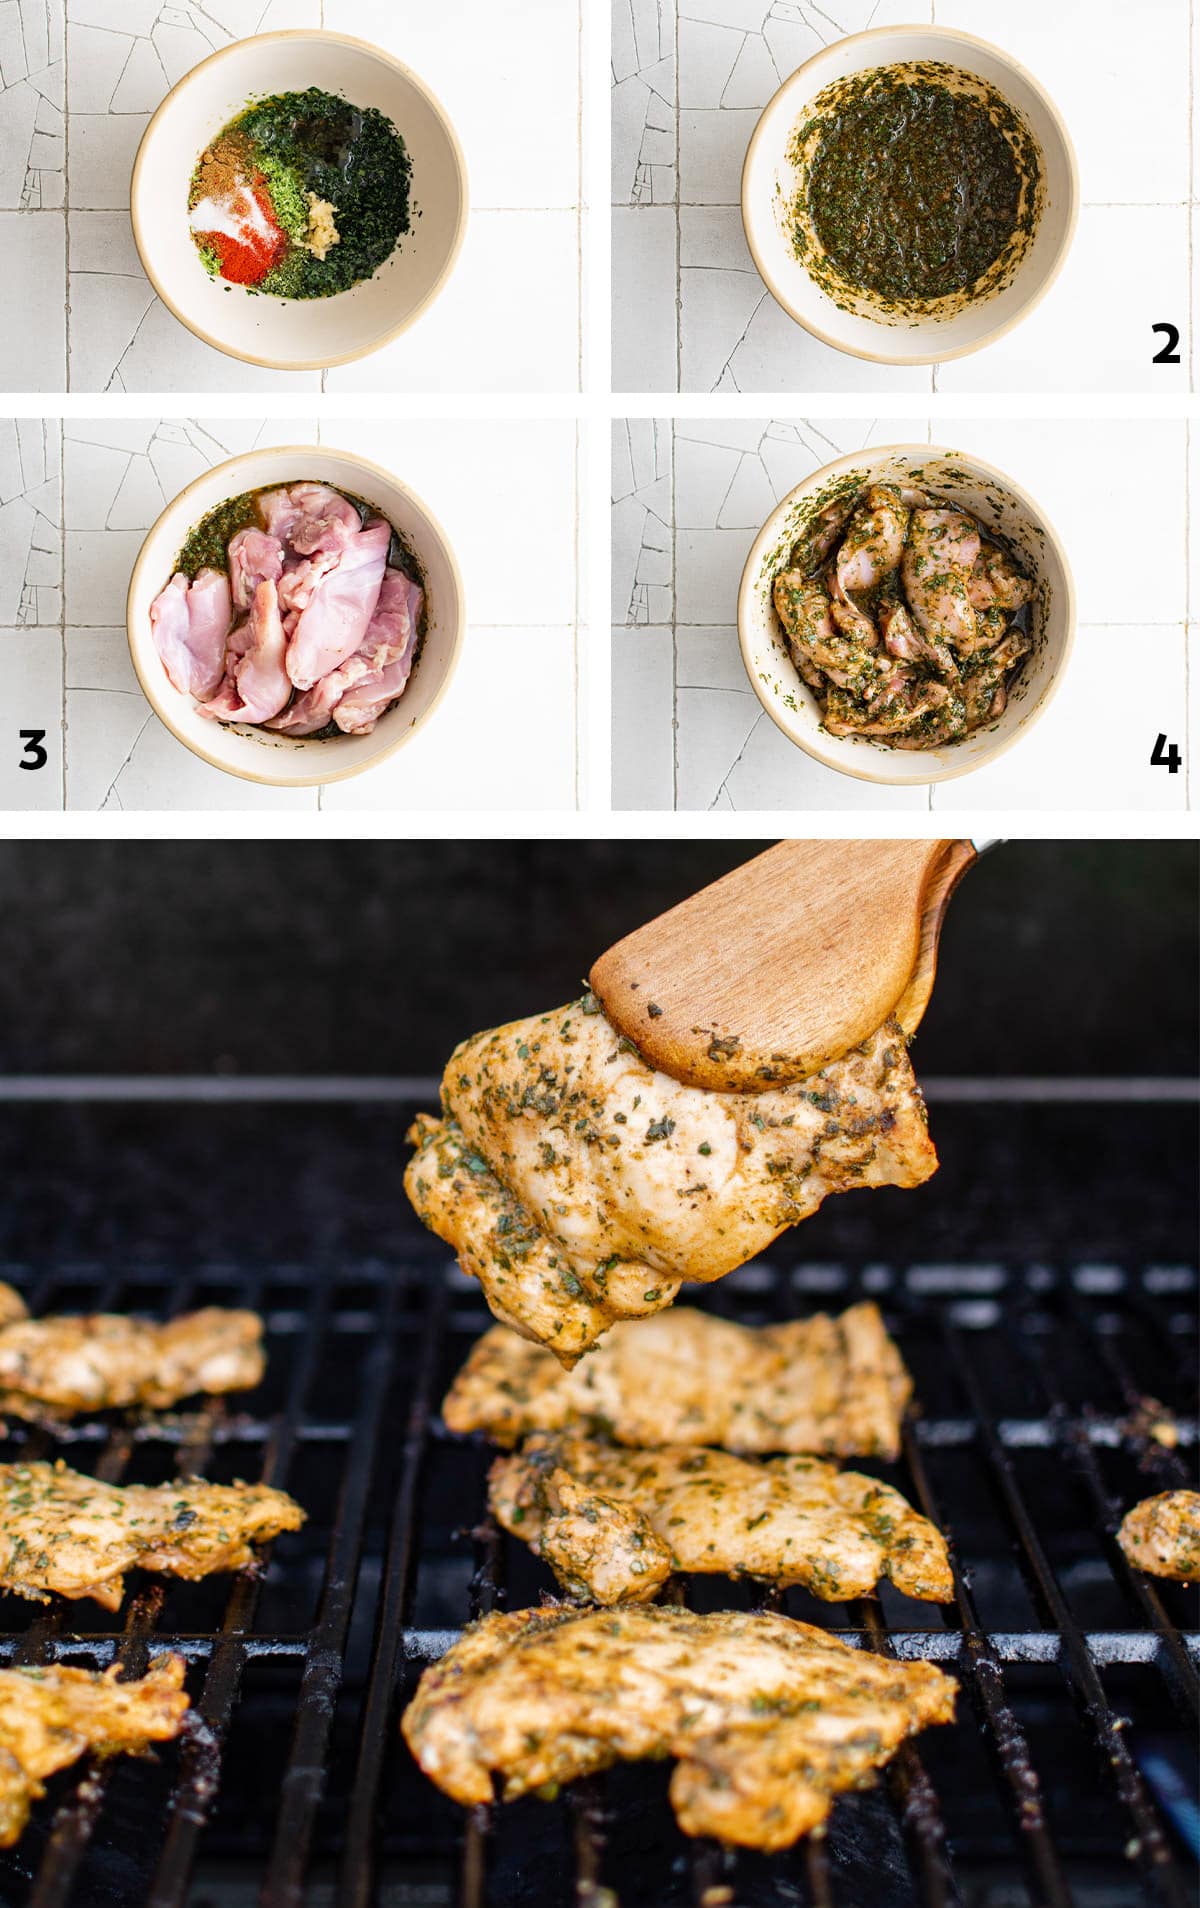 Collage of images showing how to make grilled cilantro lime chicken.